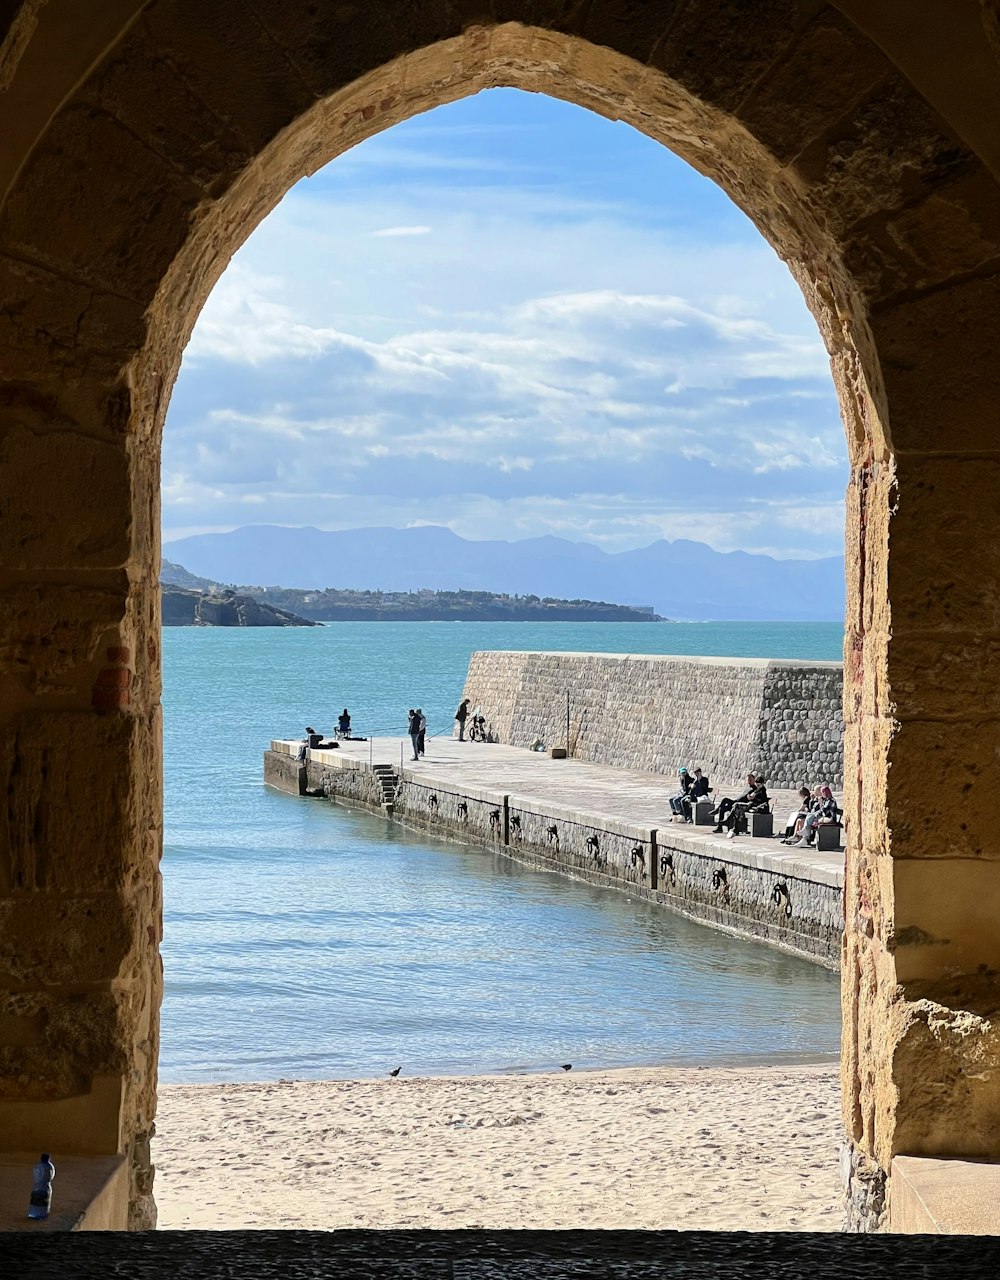 a view of a body of water through an archway